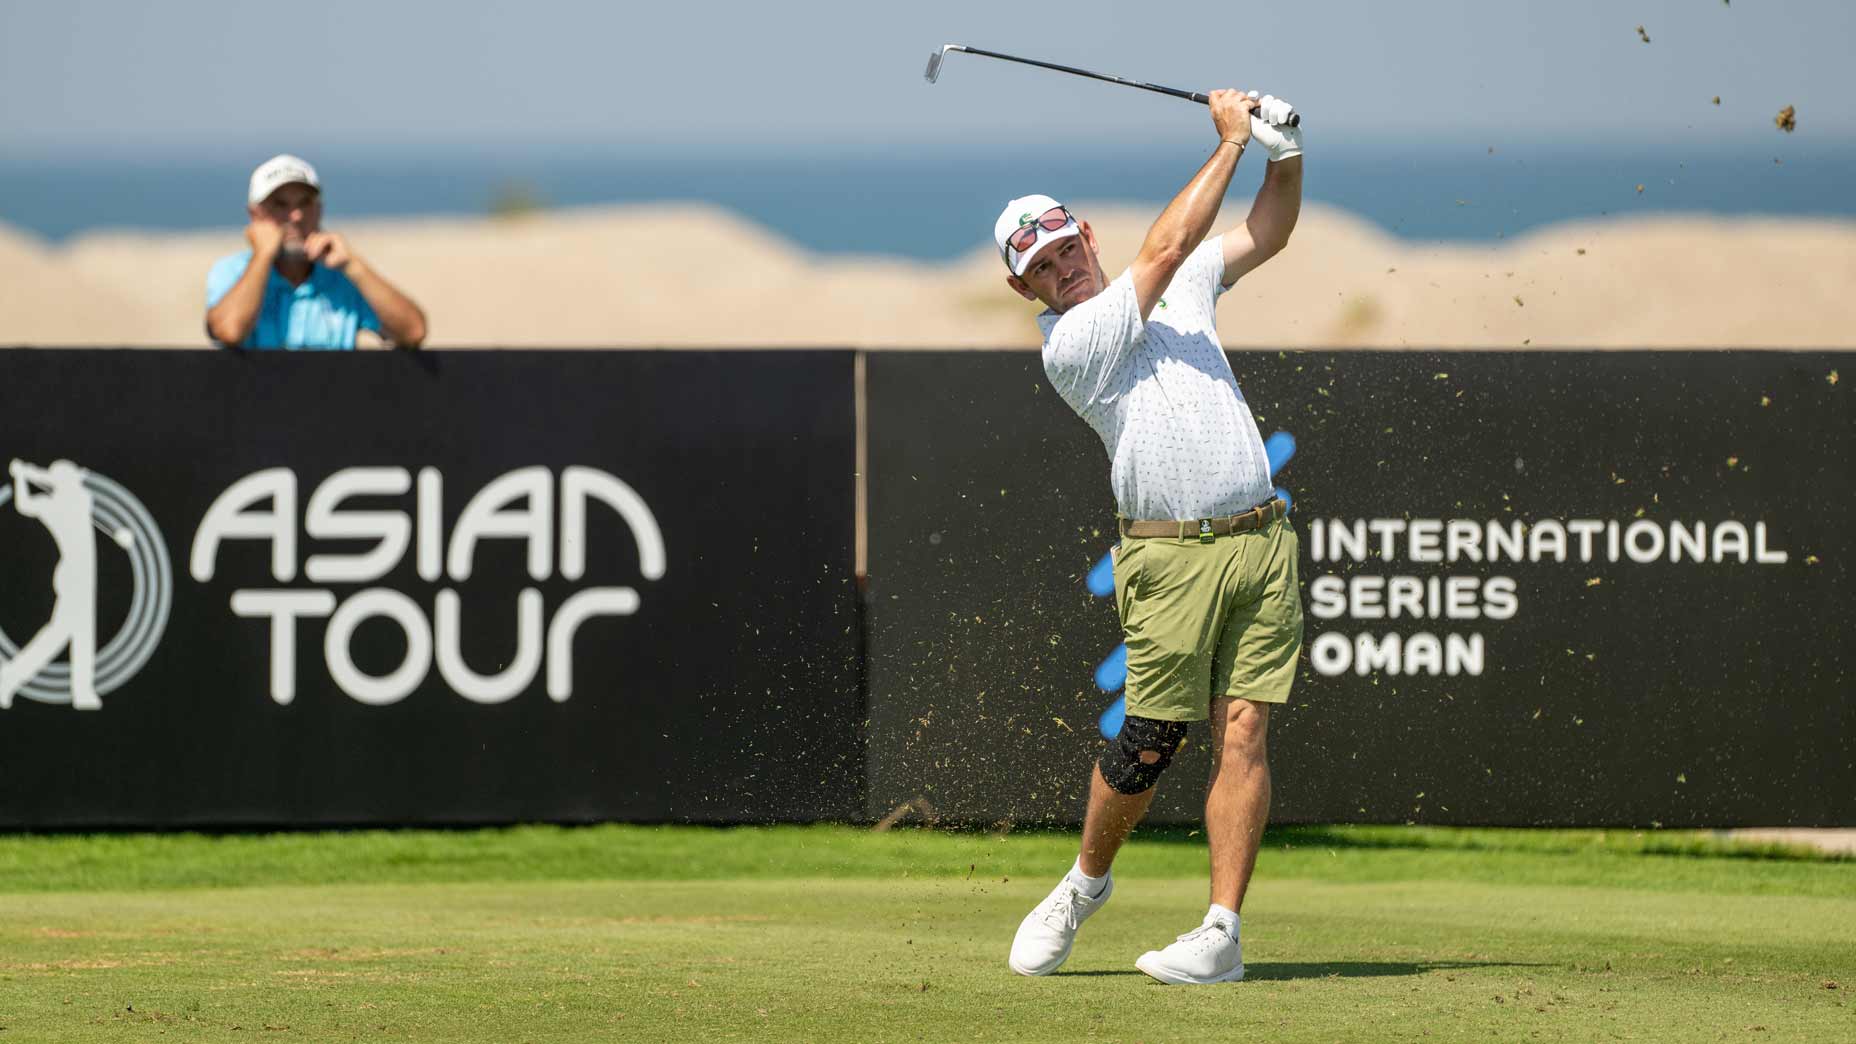 Louis Oosthuizen hits drive during 2024 International Series Oman tournament